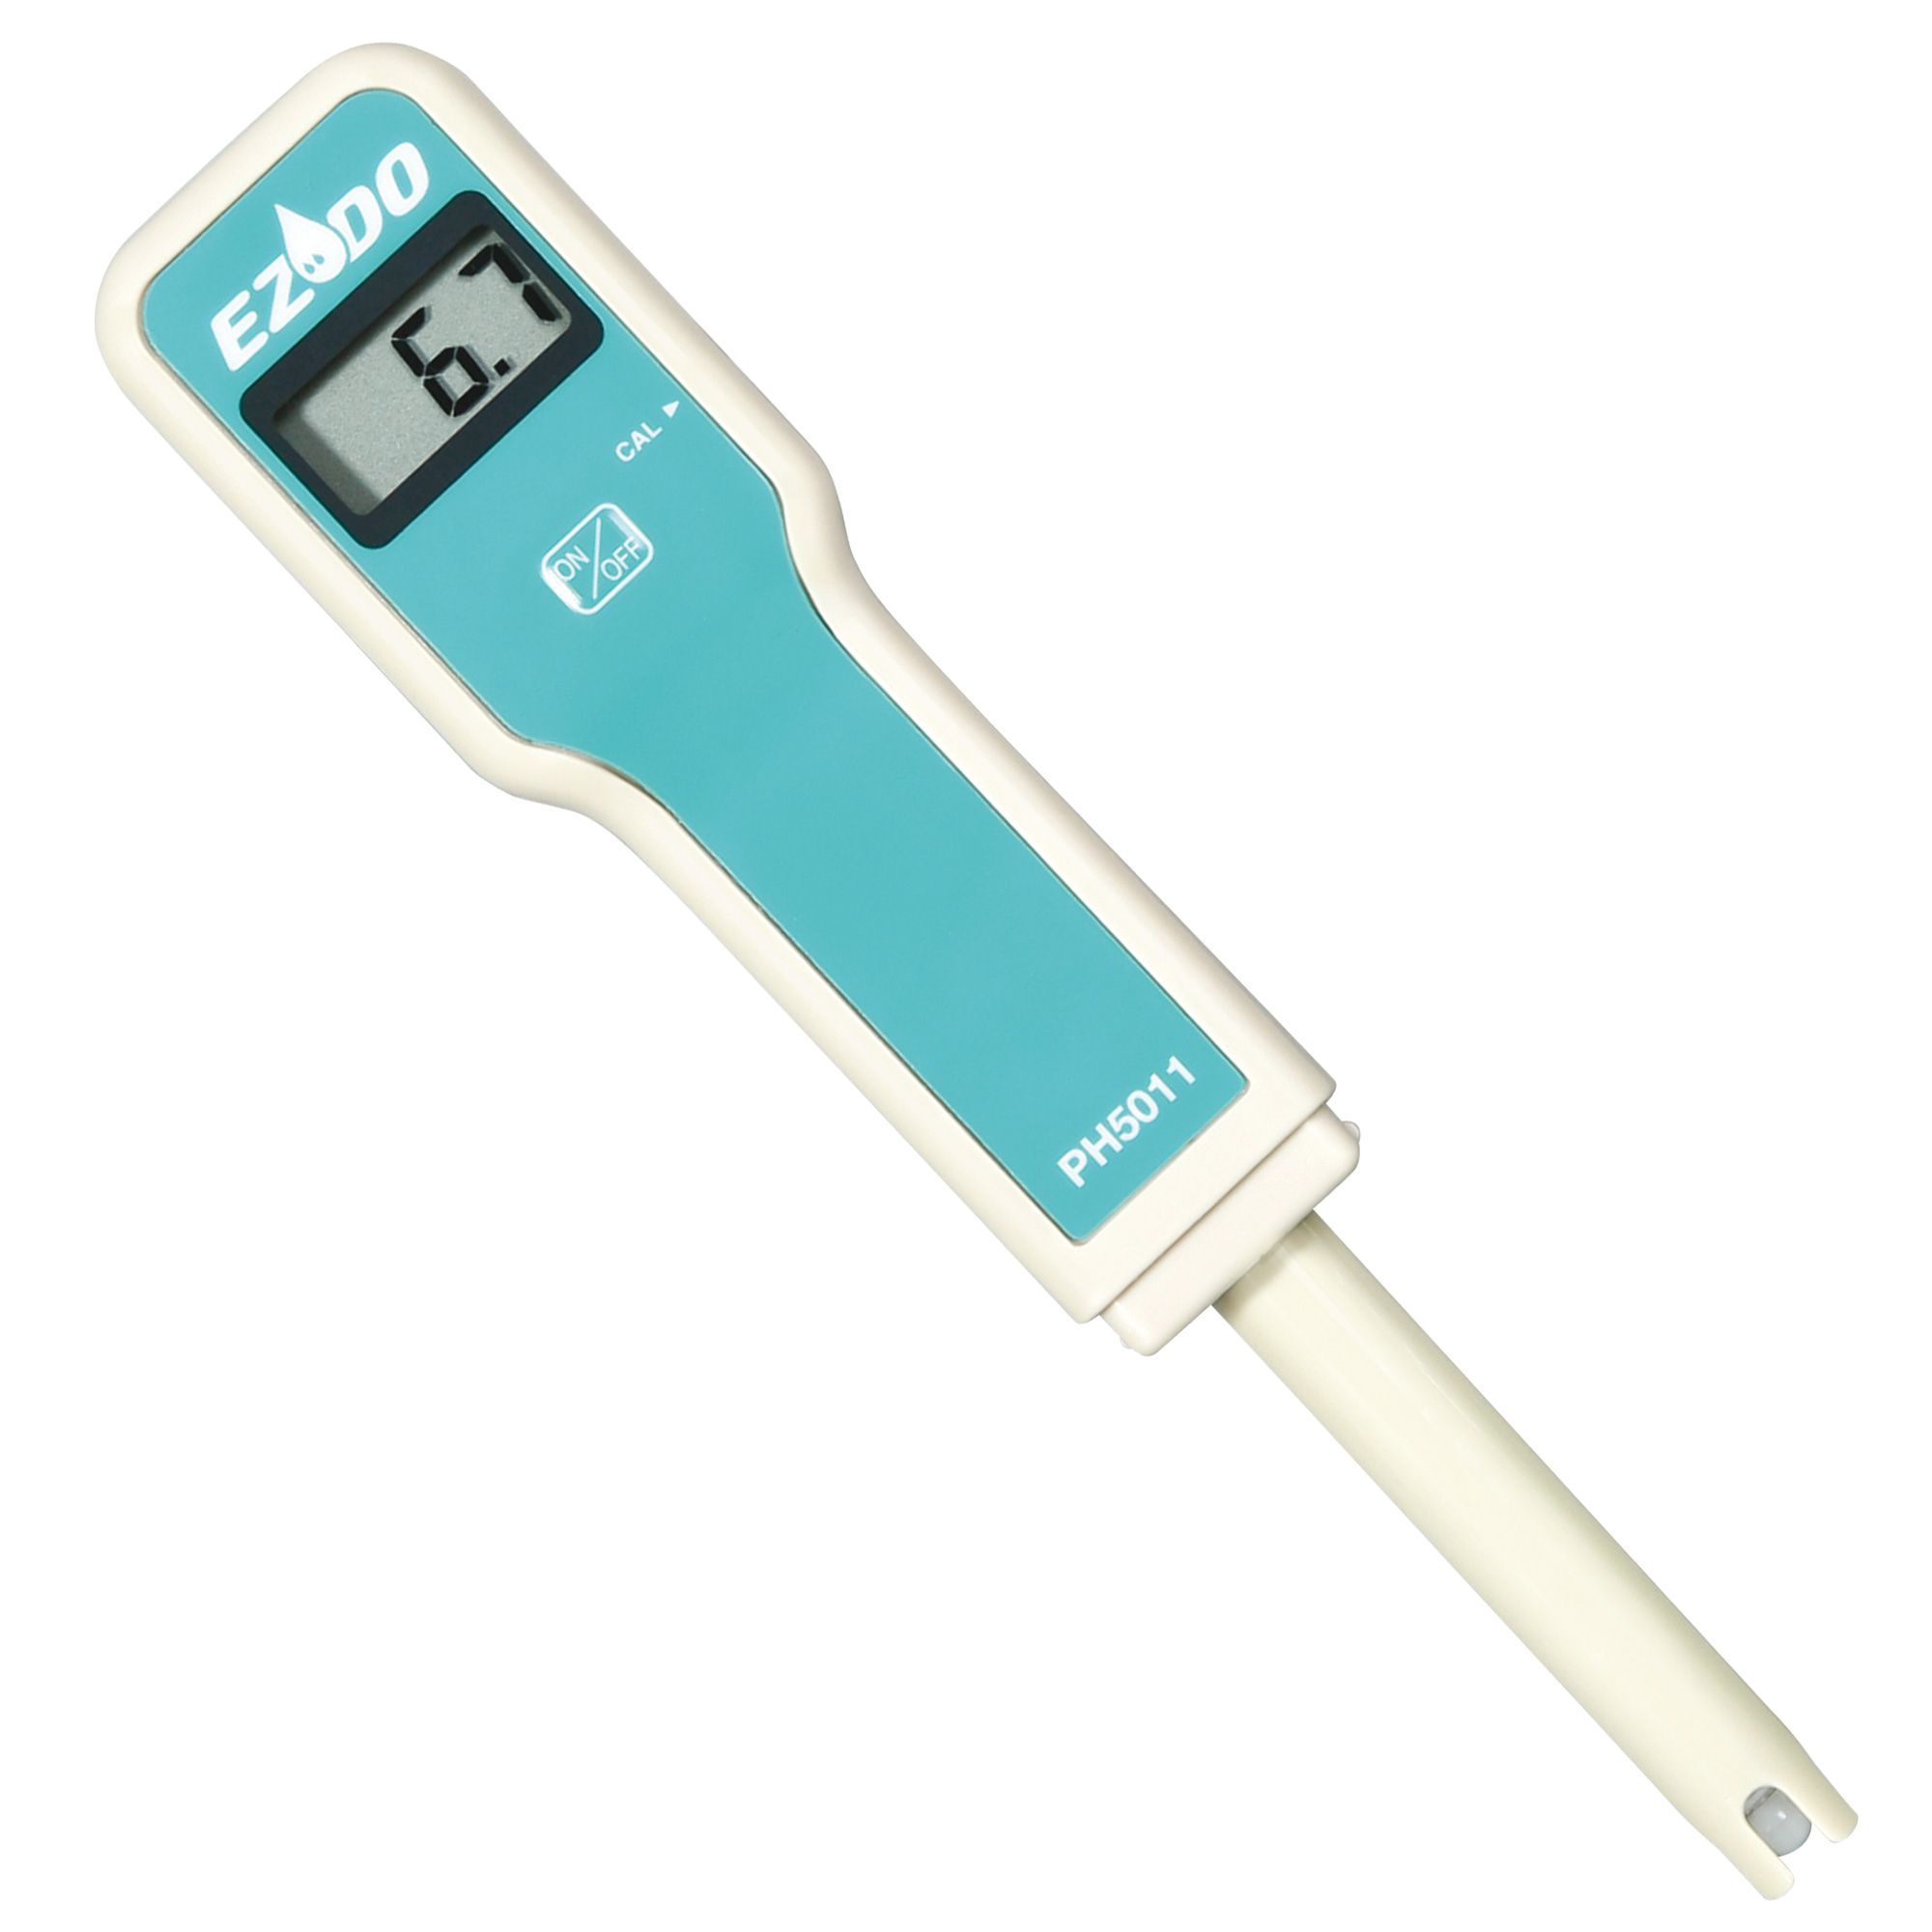 Mini Professional pH Meter Water Quality Tester Monitor Analysis Device V6N0 